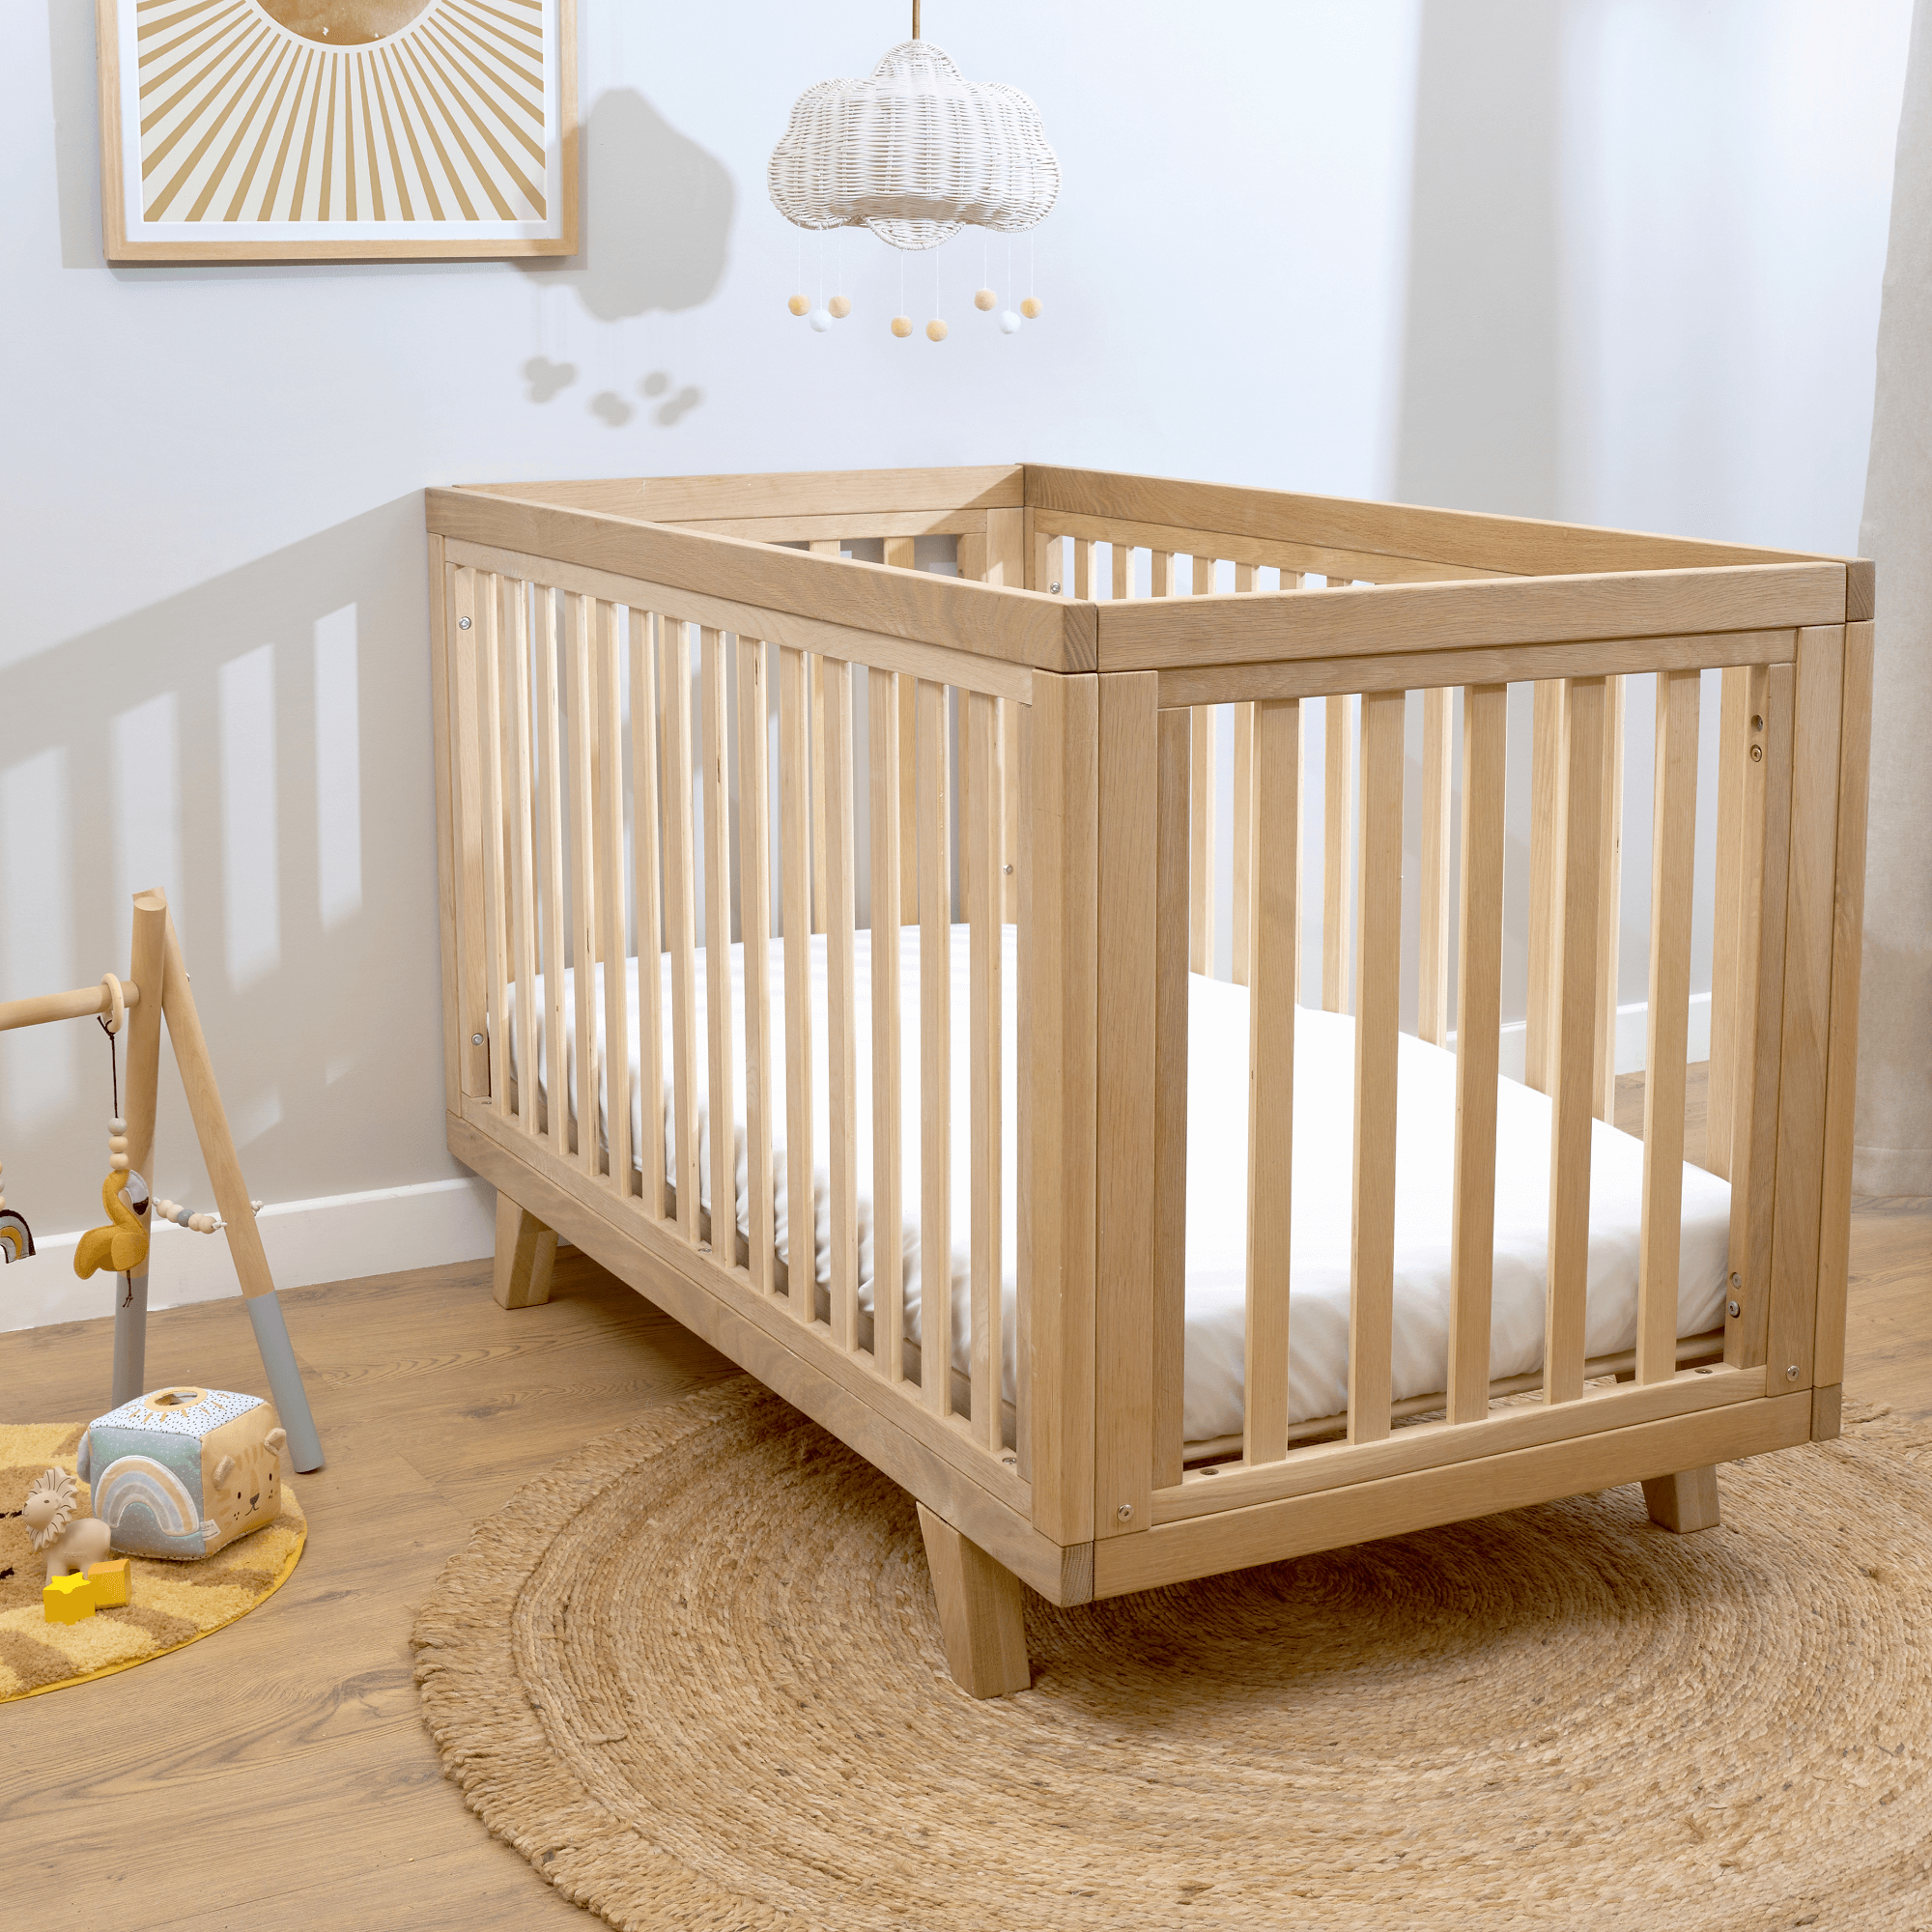 The Benefits of a Toddler Cot Bed for Young Children